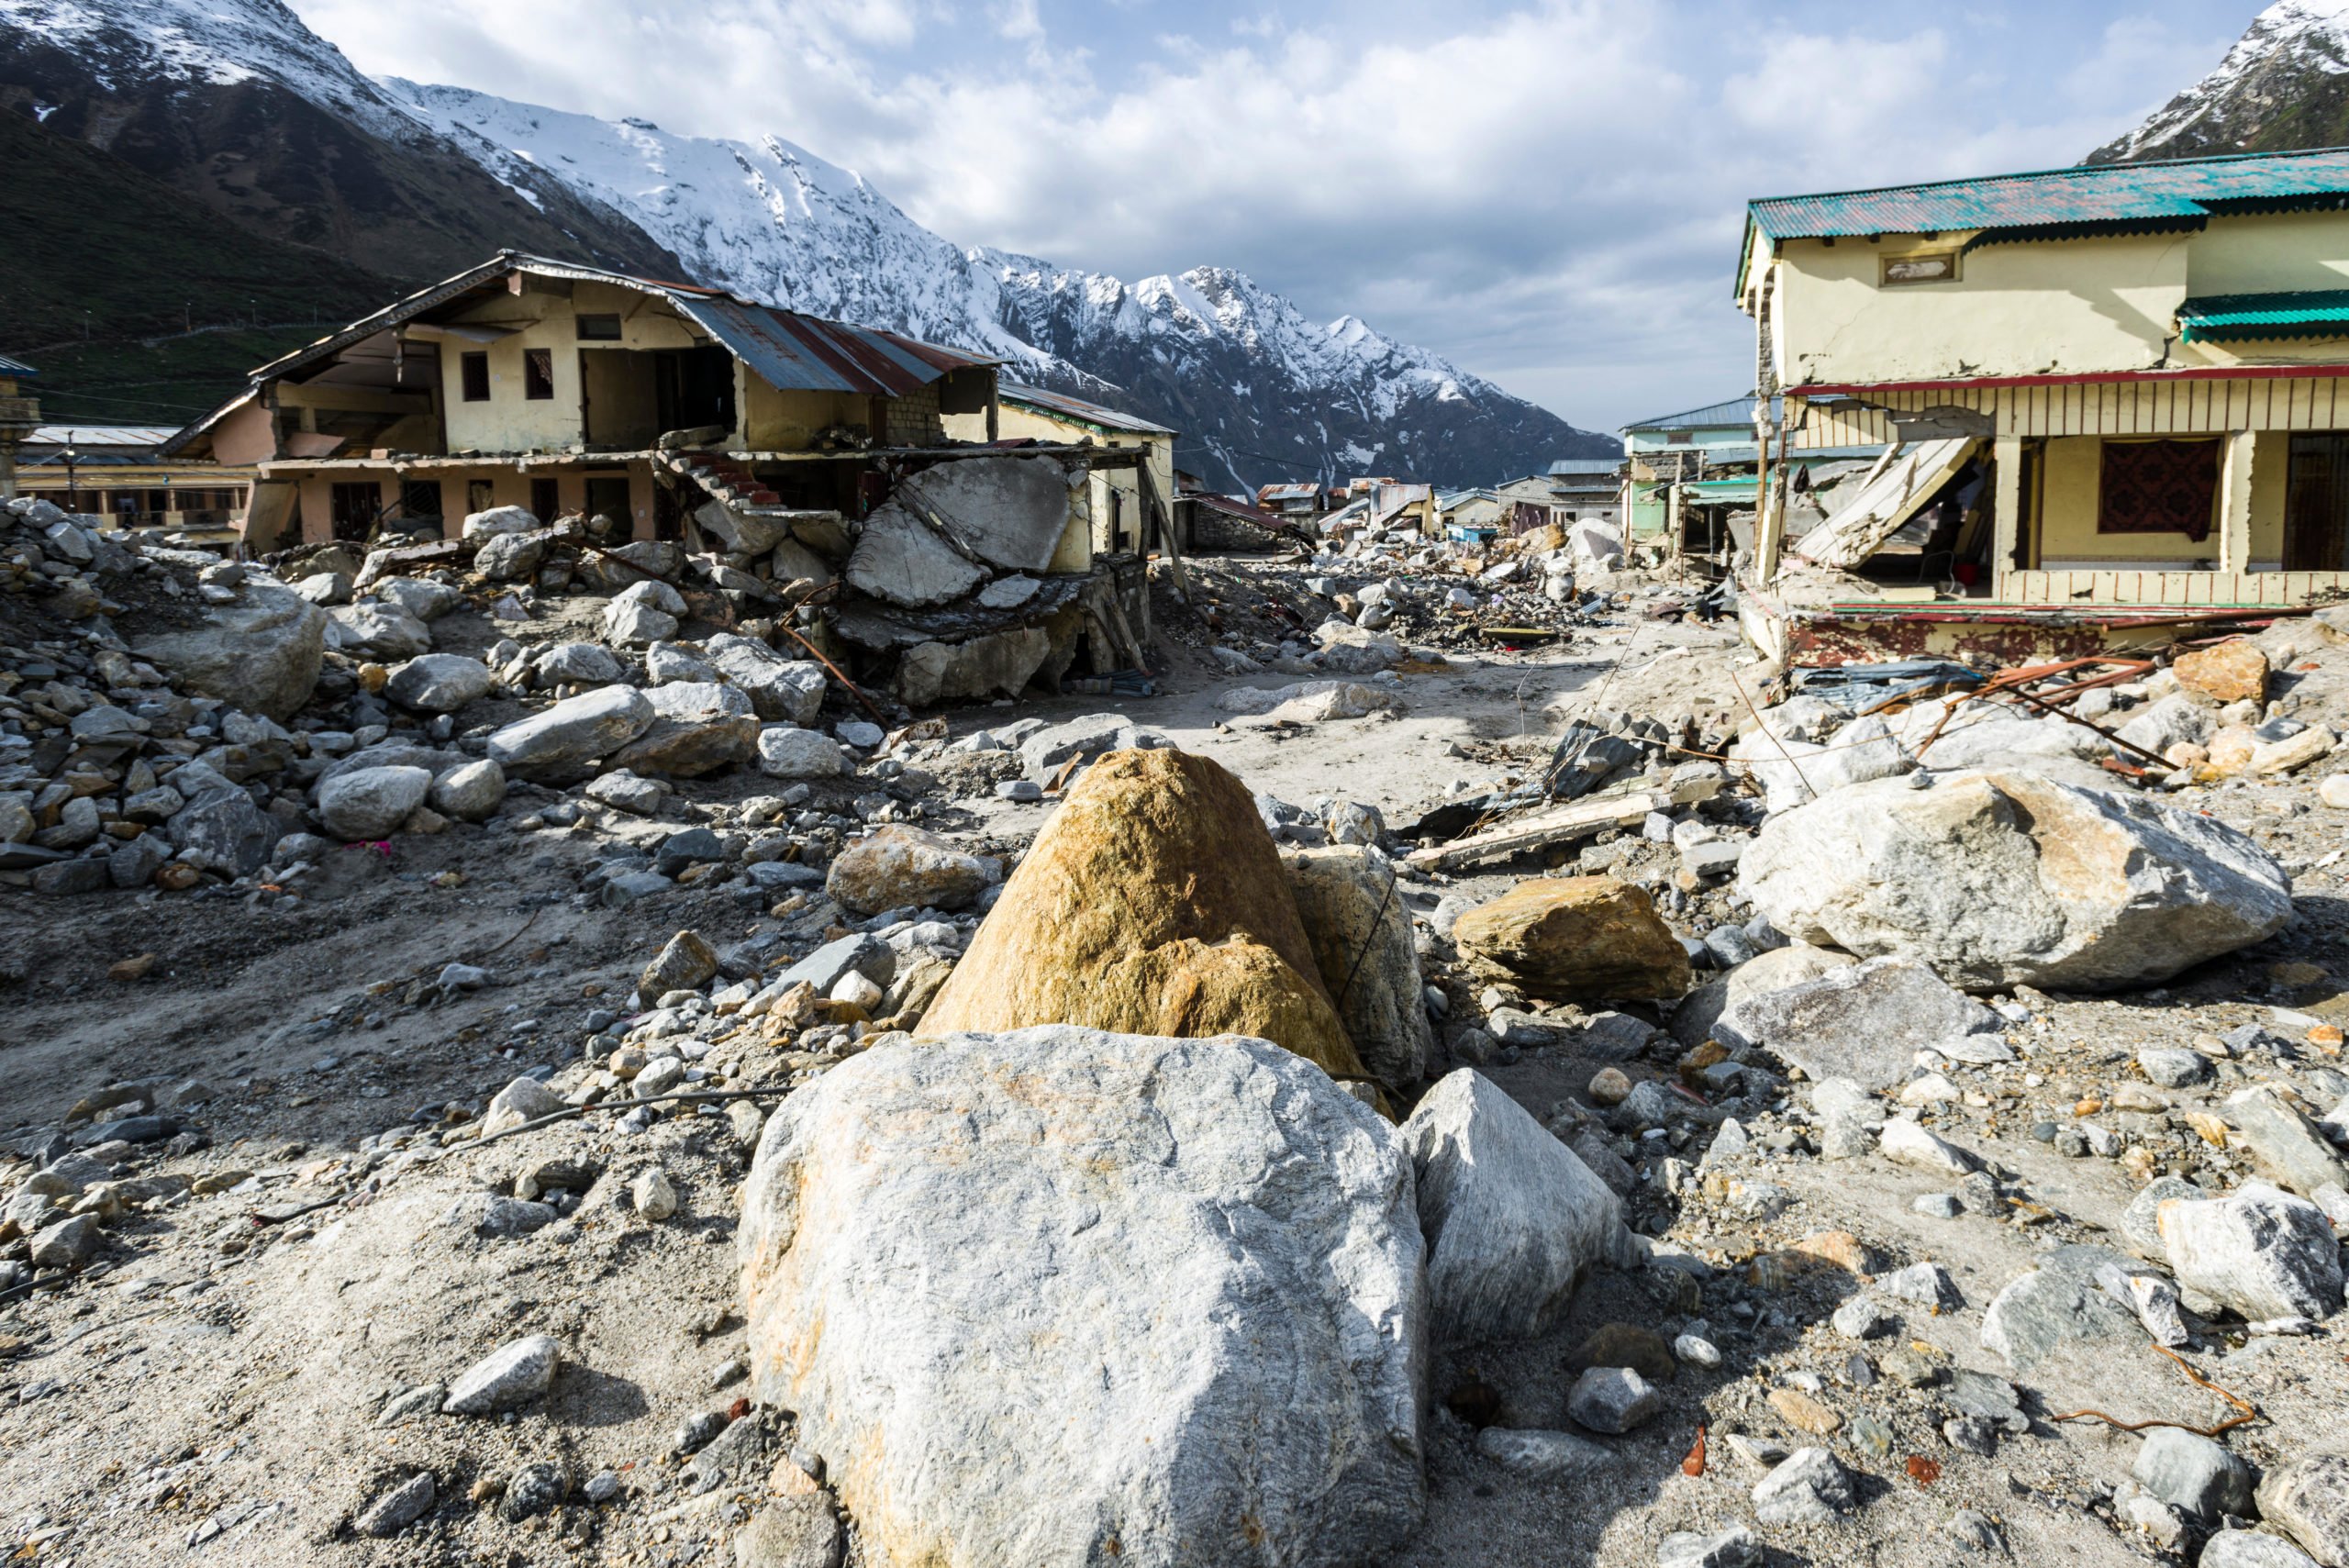 <p>The ruins of a small town in Uttarakhand that was destroyed by the Mandakini River in 2013. The disaster was triggered by torrential rains that set off landslides, floods and a lake outburst and debris flow. (Image: Frank Bienewald / Alamy)</p>